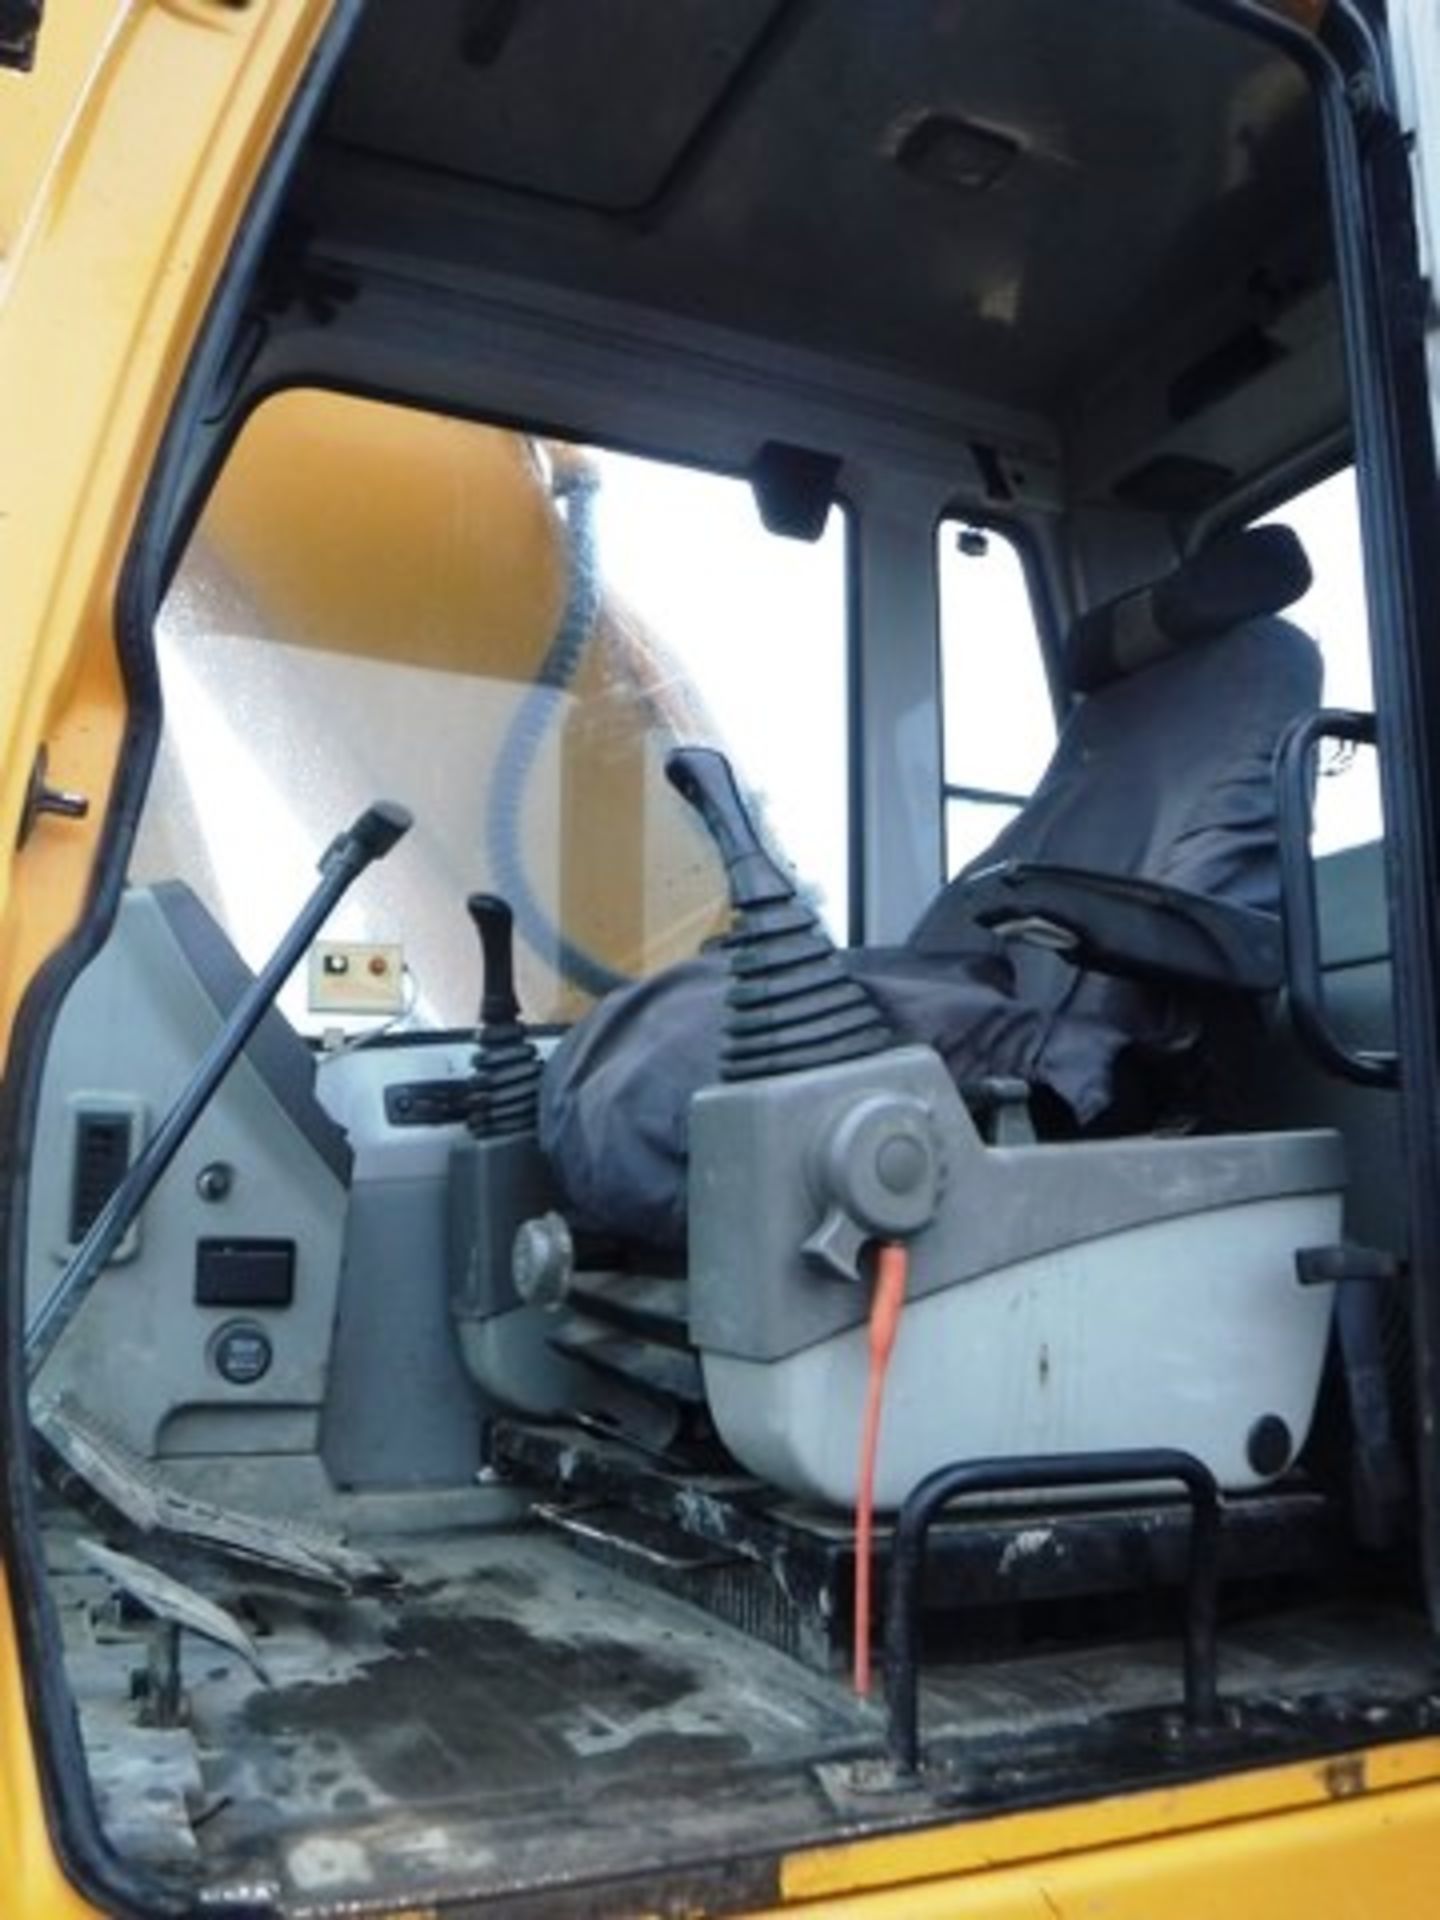 2007 HYUNDAI ROBEX 210LC-7 DIGGER, ENGINE POWER 145/107/1950. SN N0615131 8759HRS (NOT VERIFIED) C/W - Image 14 of 28